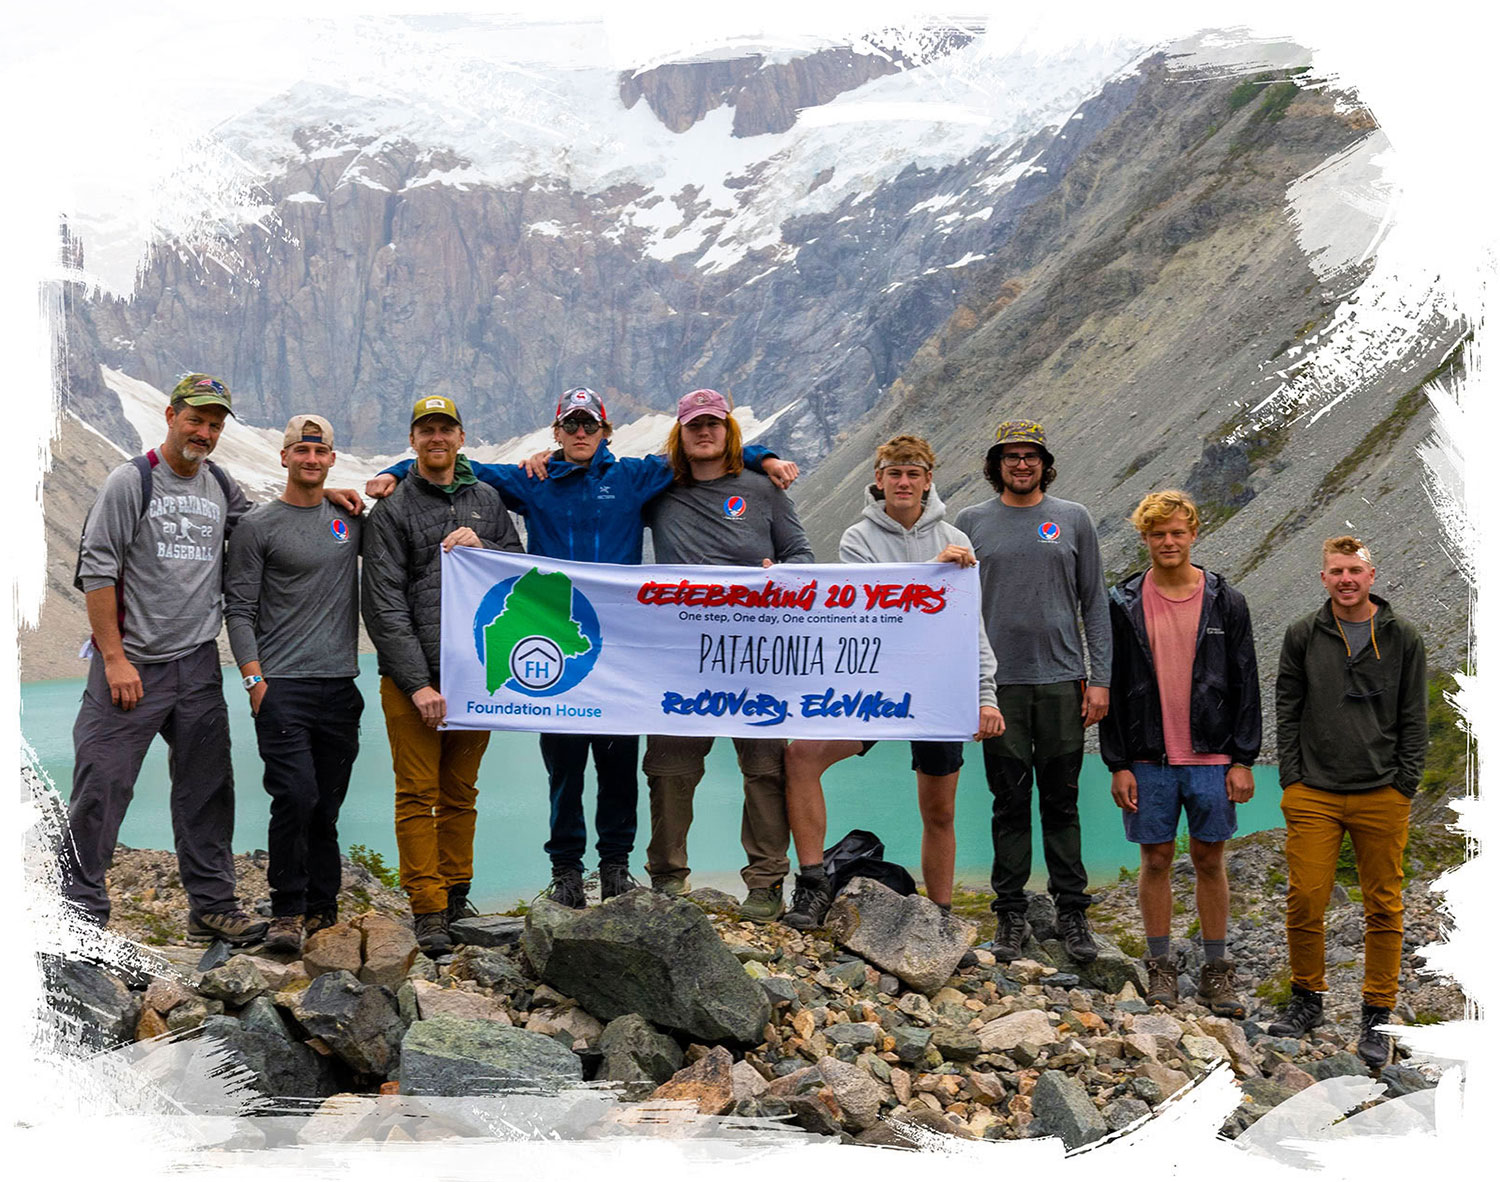 A group of men pose with a Recovery at Foundation House banner, under a mountain range in Patagonia, Chile.